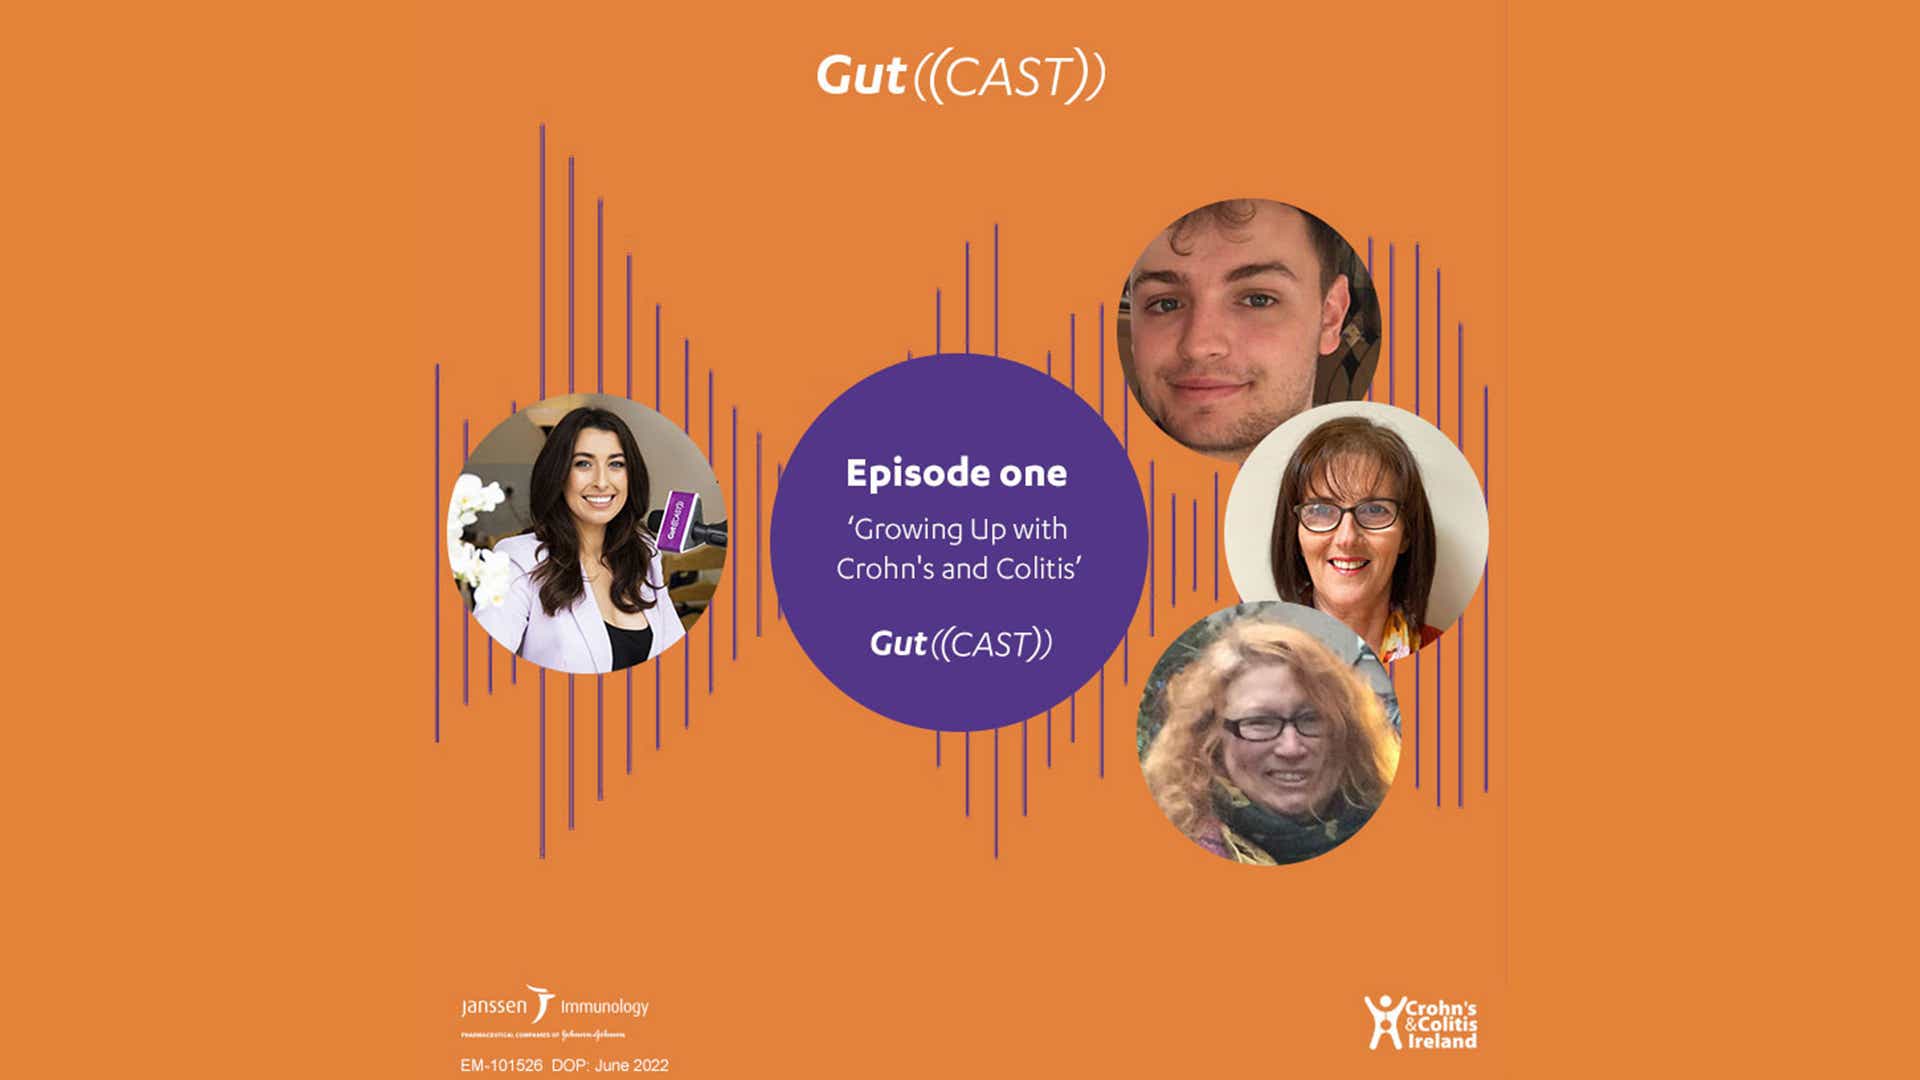 Season three episode one of the Gutcast series named "Growing Up with Crohn's and Colitis"